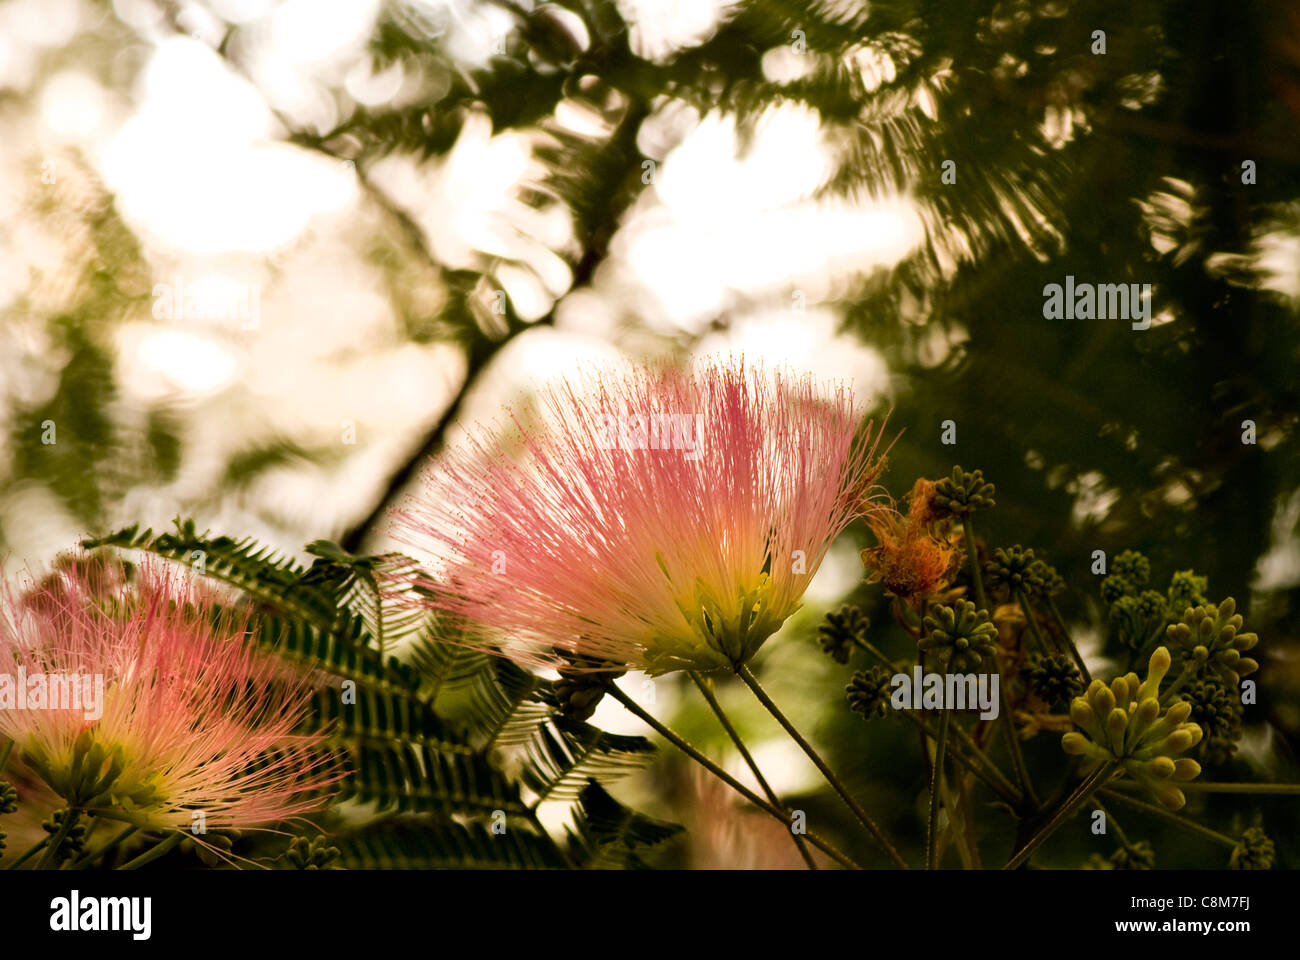 Mimosa flowers in tree. Stock Photo